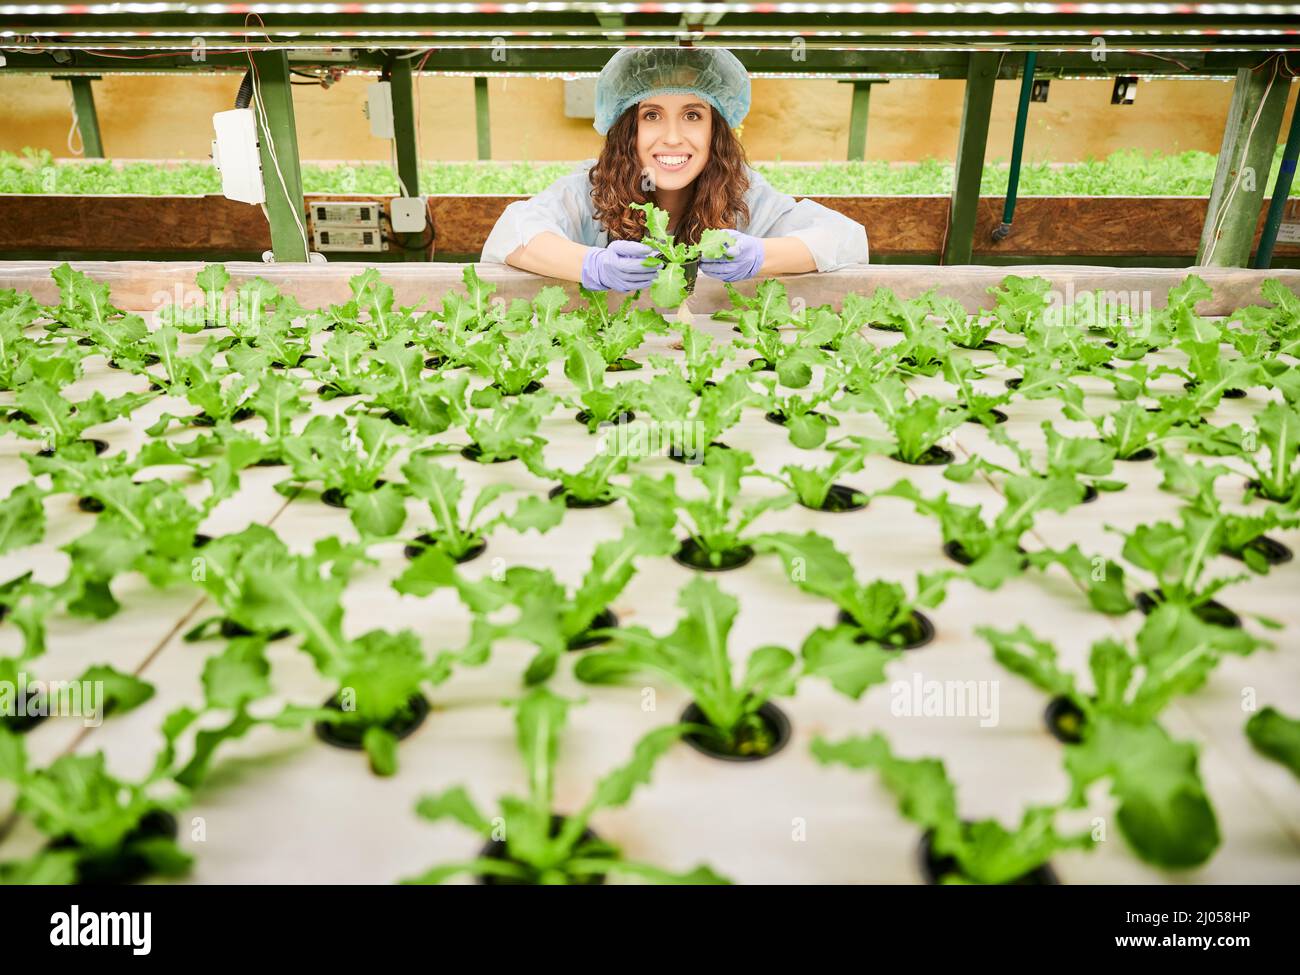 Joyful female gardener checking plant growth. Cheerful woman in disposable cap standing near greenhouse shelf with plants. Stock Photo